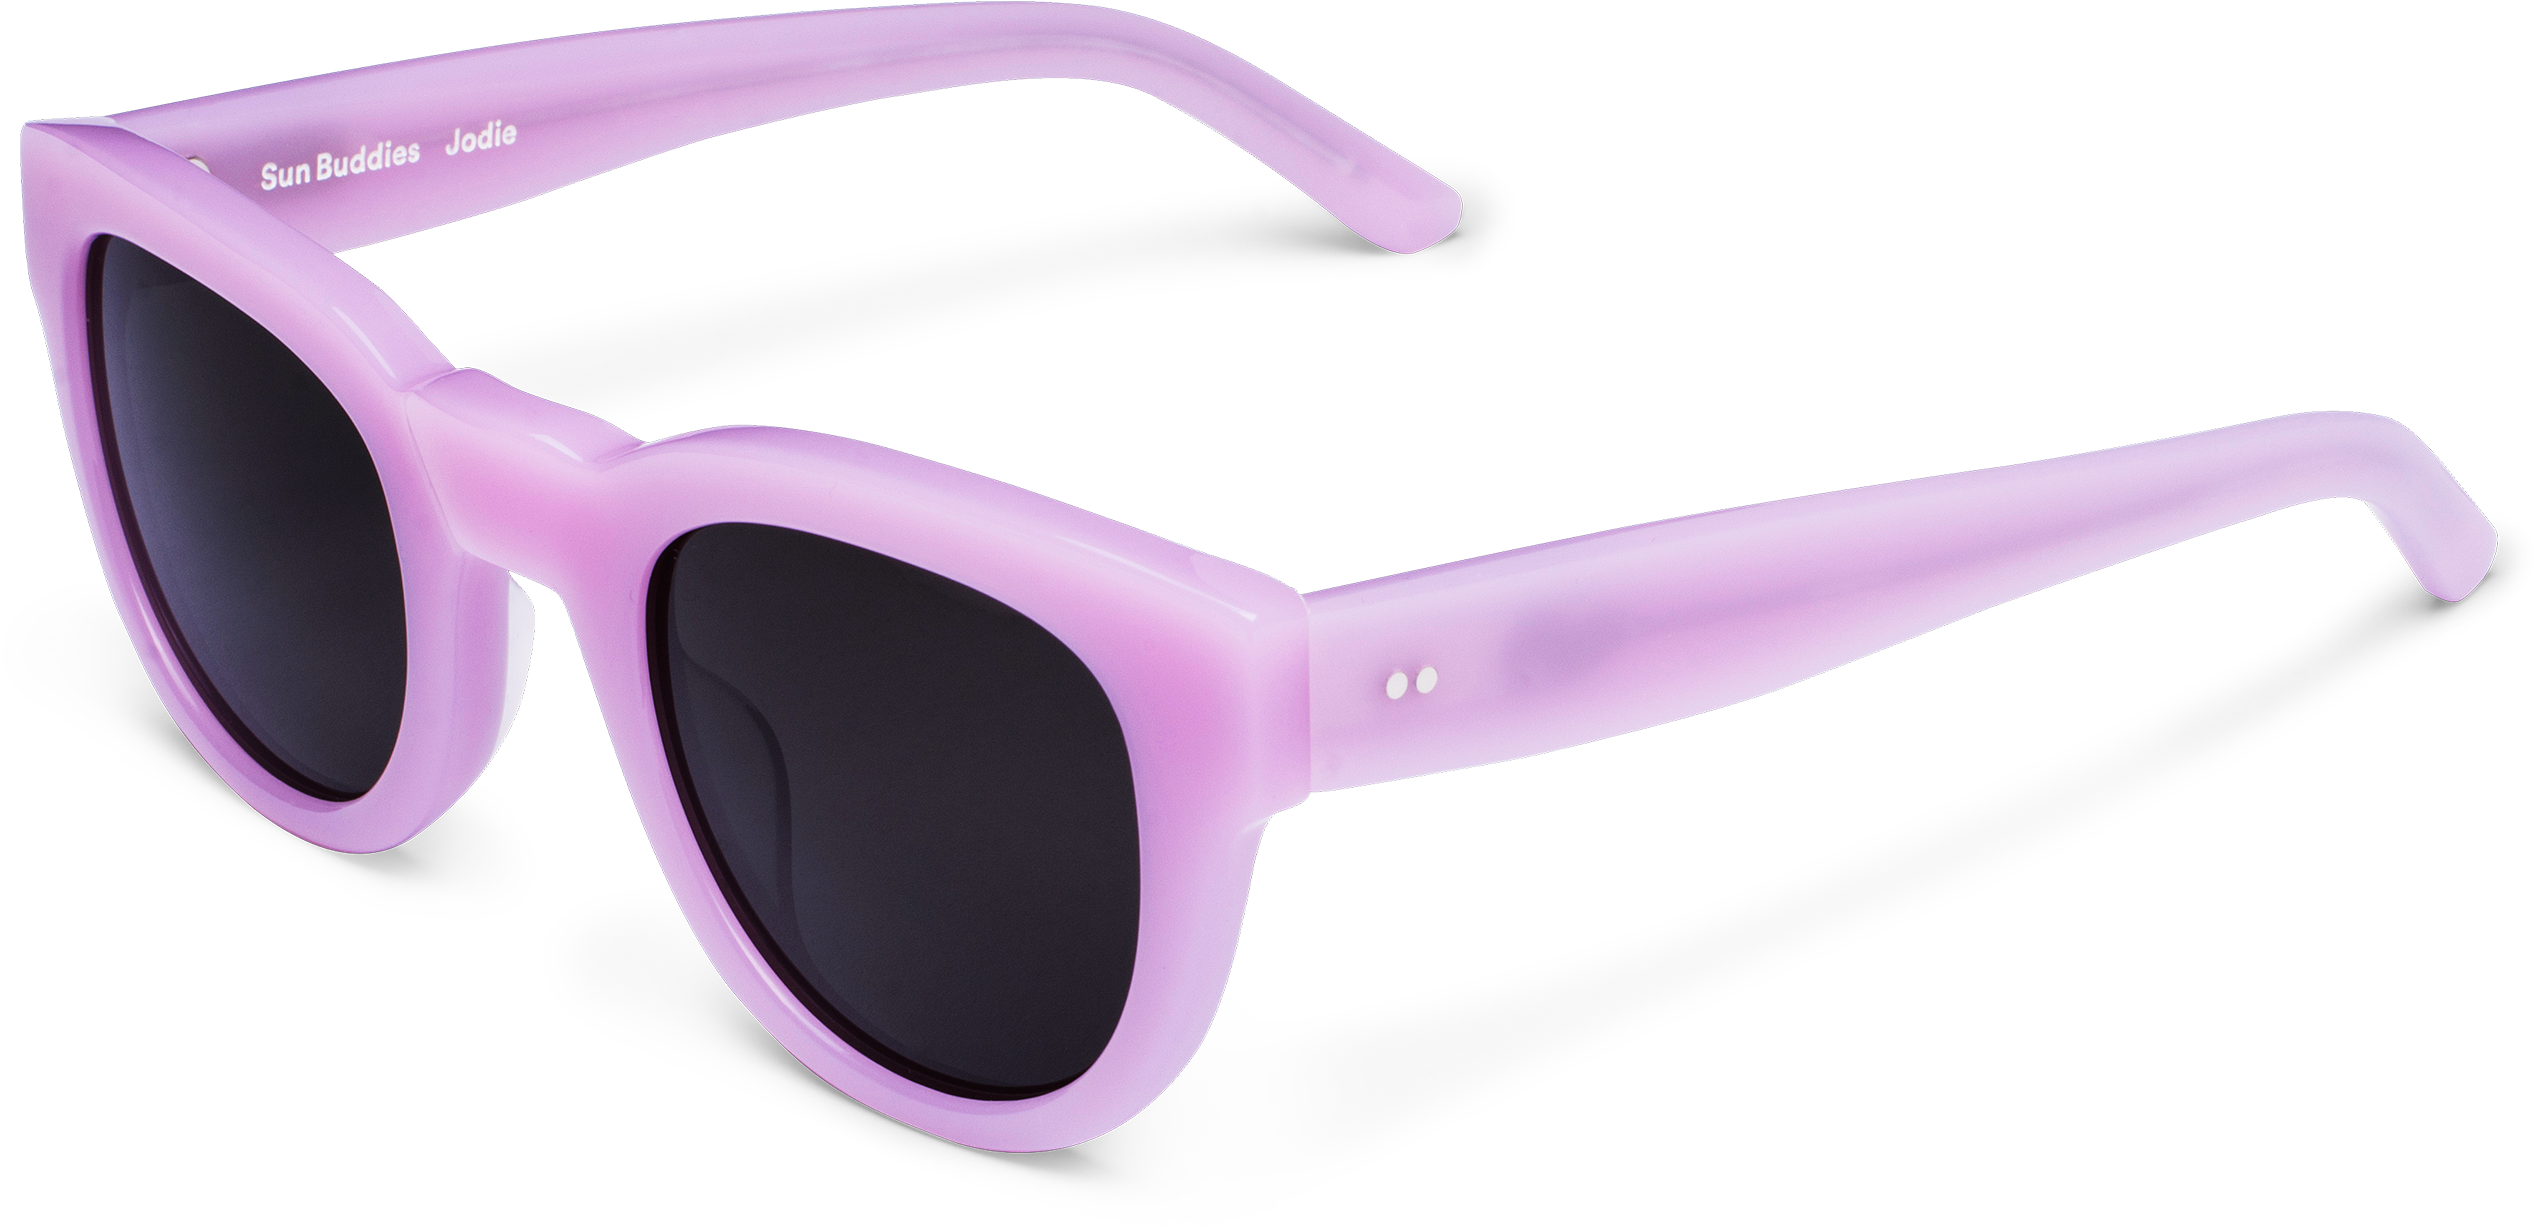 Milky Vintage Inspired Slightly Thicker Frame In Pink, - Sun Buddies Acetate Jodie Sunglasses-pink Panther (3072x1350), Png Download